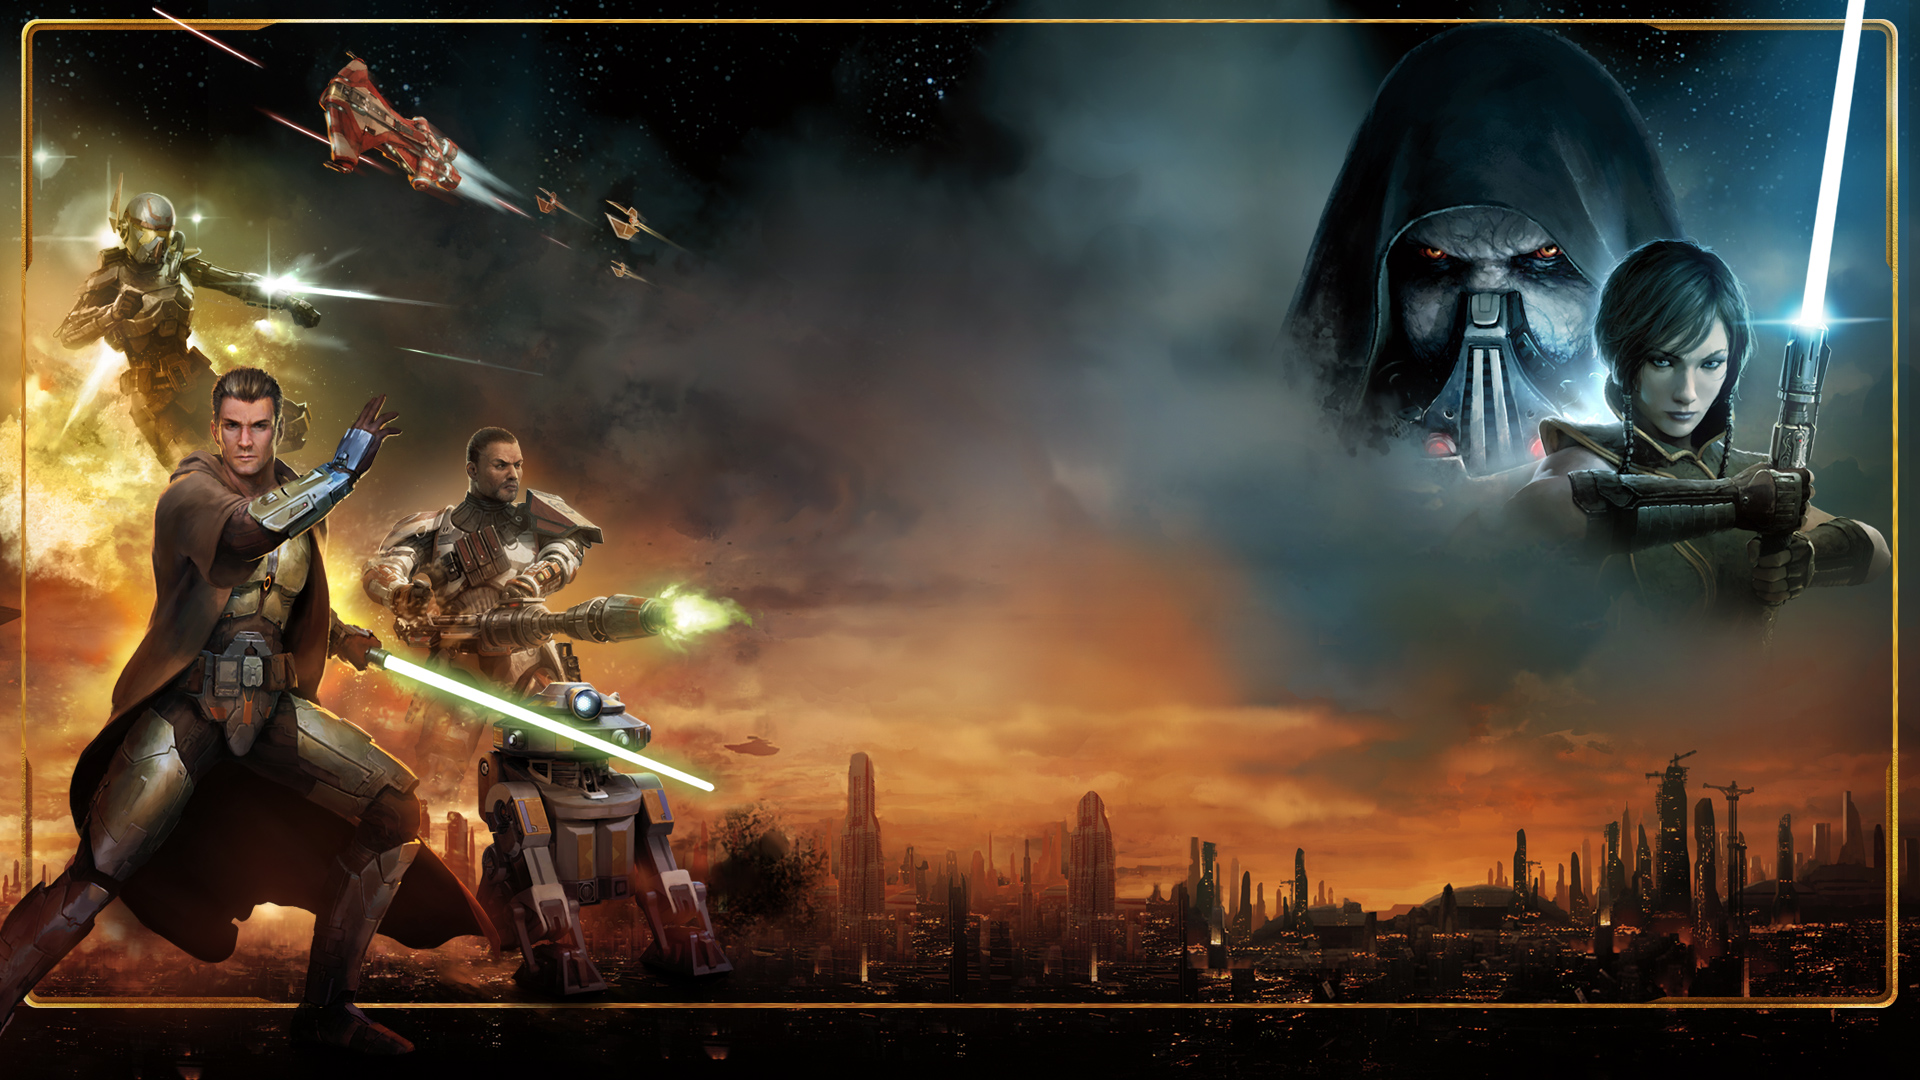 Star Wars The Old Republic Unofficial Desktops For Full HD And